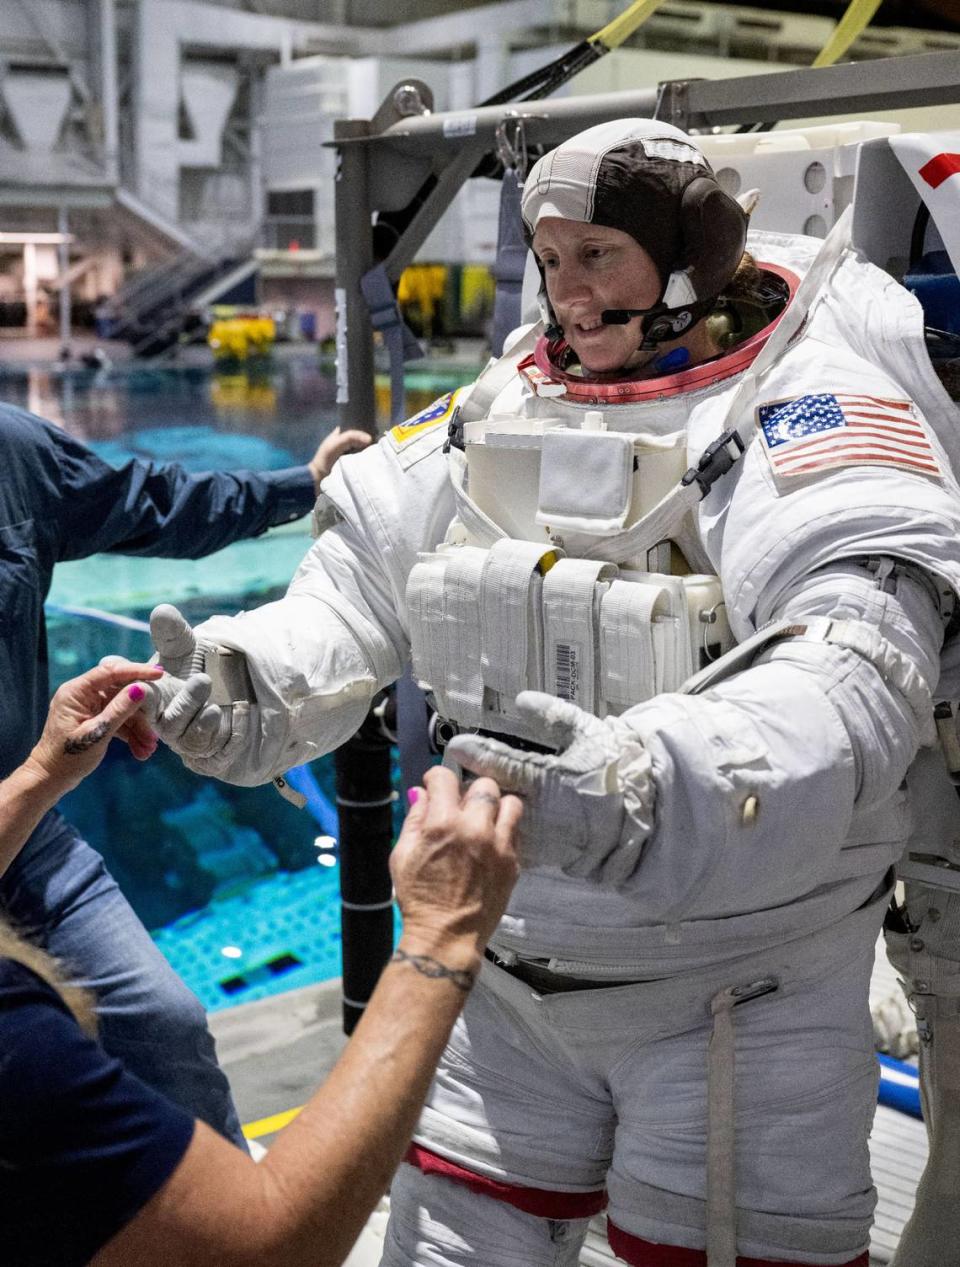 Jessica Wittner is seen in a NASA space suit during training in this undated photo from the space agency.